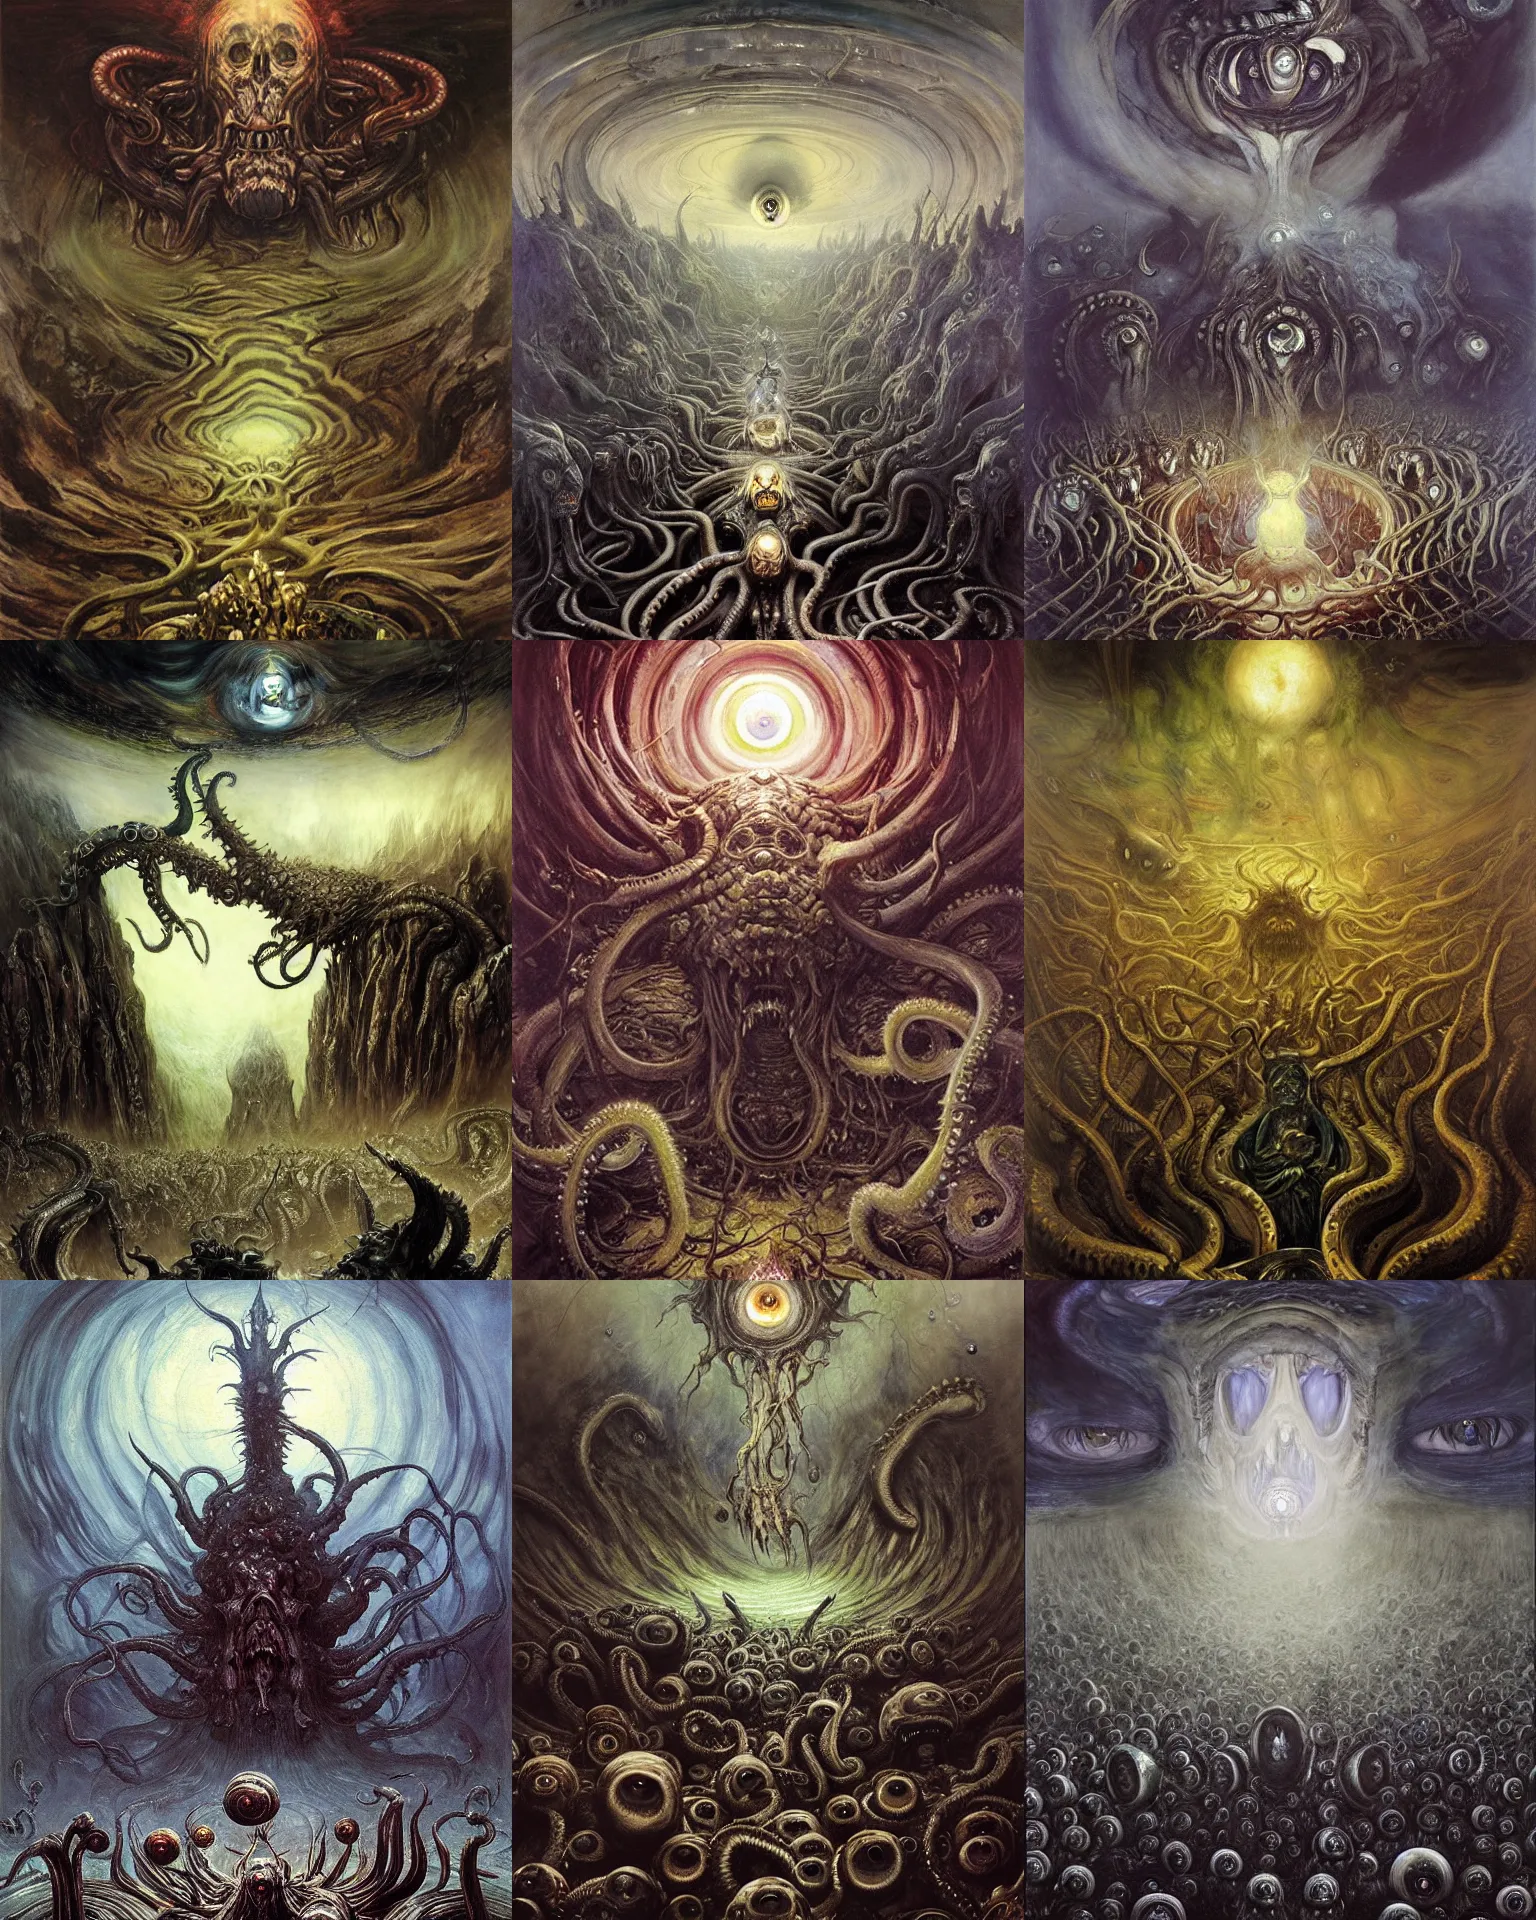 Prompt: ritual of otherworldly massive cthulu god arising a grim obsidian landscape made of giant eyeballs, painting by donato giancola, artgerm, edvard munch john berkey, gustave dore, thomas moran, hieronymus bosch, hp lovecraft, paranoid vibe, terror giant infinite eyes horror spider eyes tentacles maggots feeling of madness and insanity